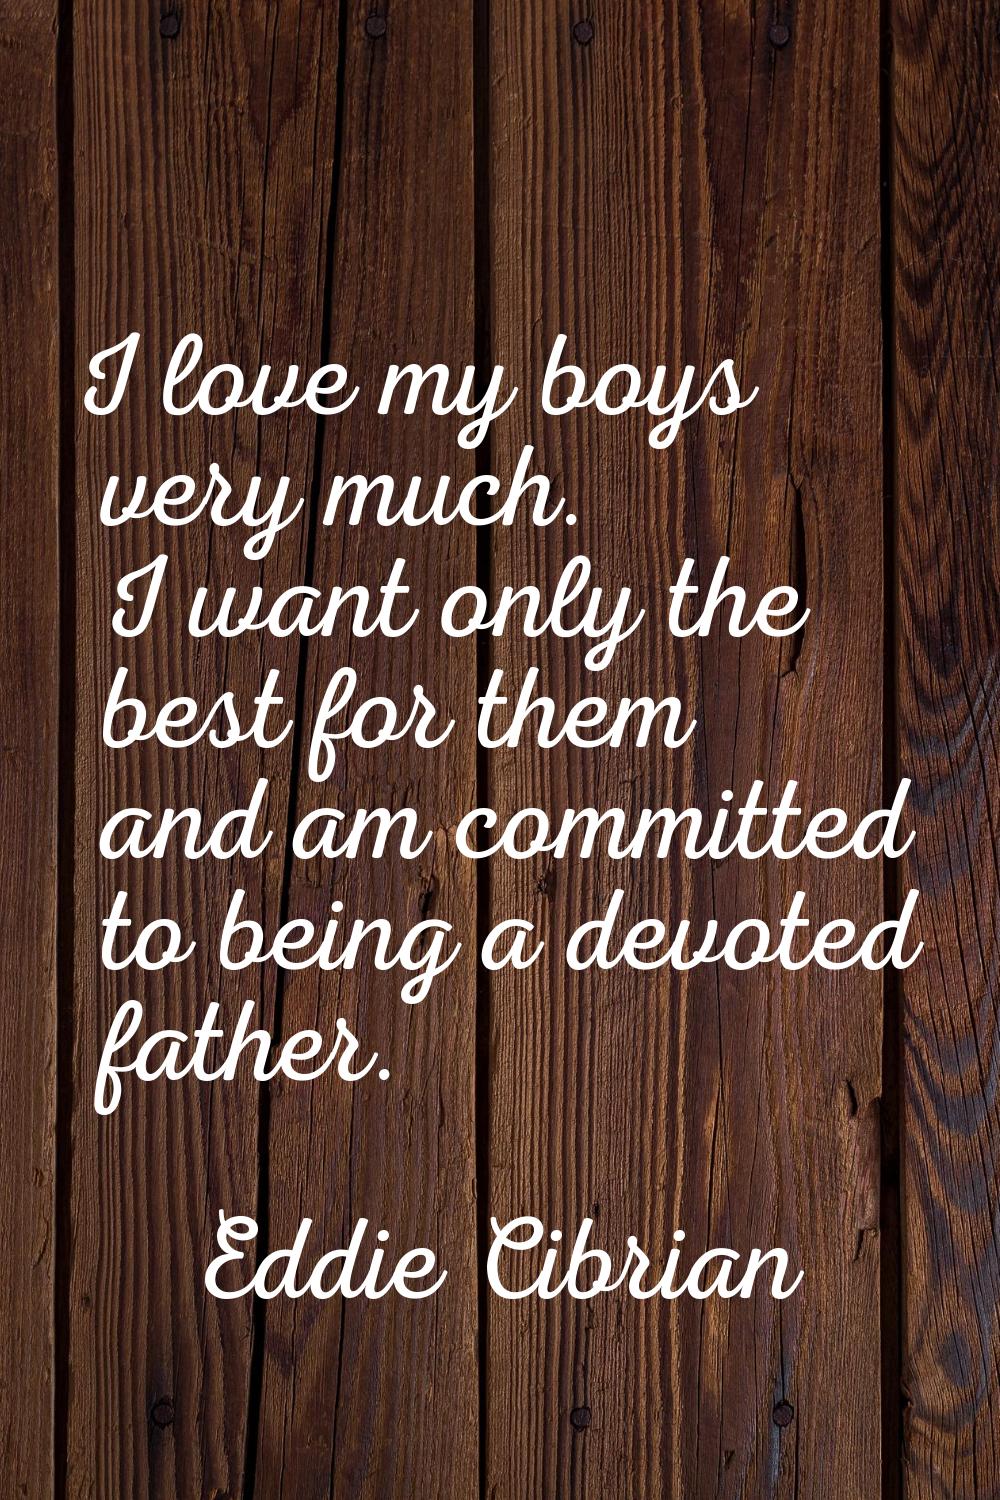 I love my boys very much. I want only the best for them and am committed to being a devoted father.